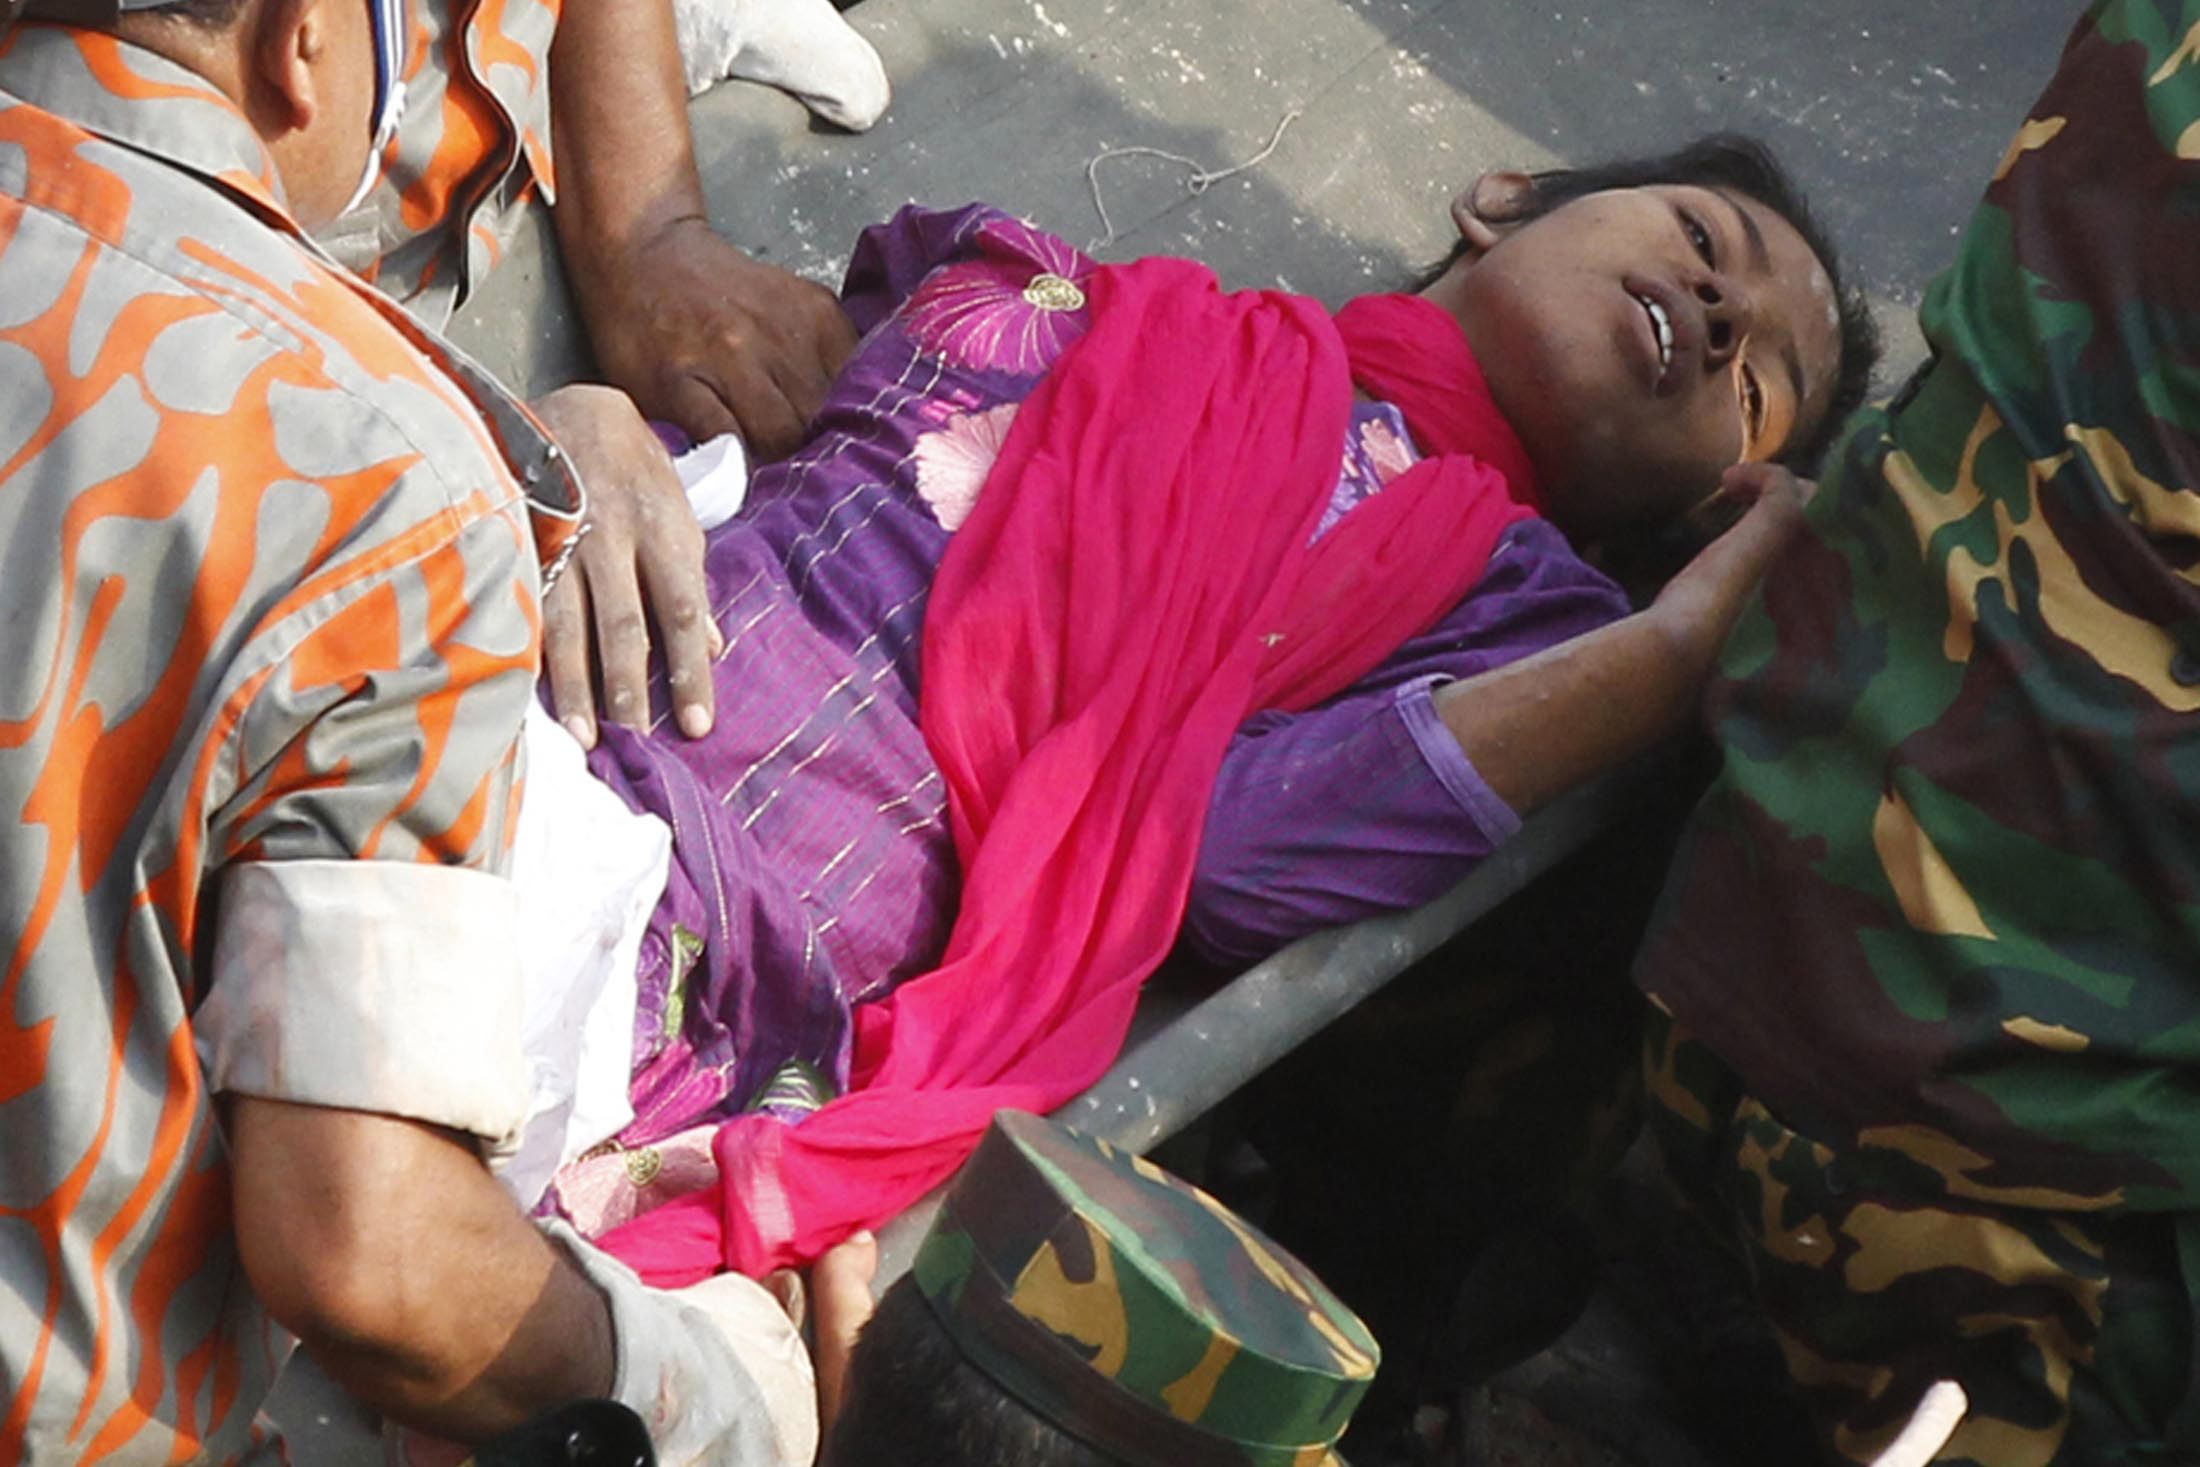 Woman Found Alive After 17 Days Under Collapsed Bangladeshi Clothing Factory Death Toll Tops